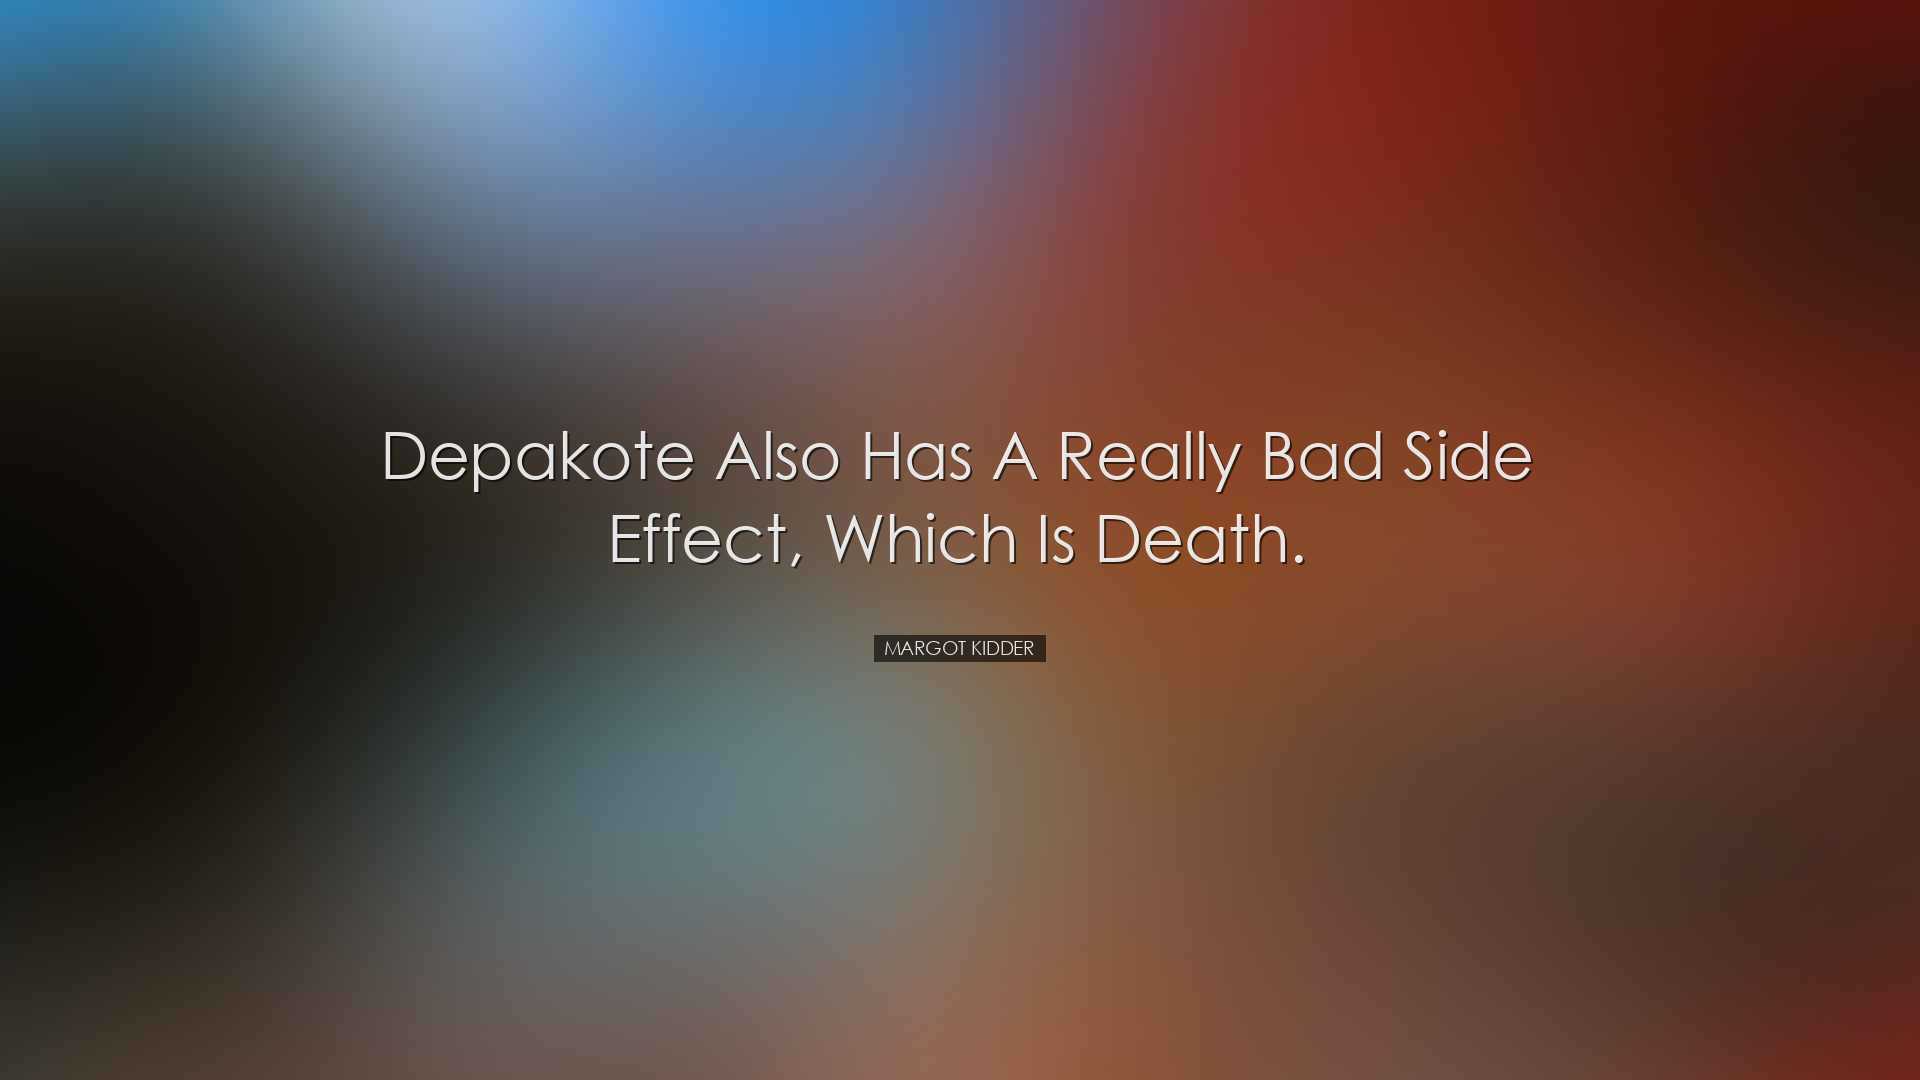 Depakote also has a really bad side effect, which is death. - Marg